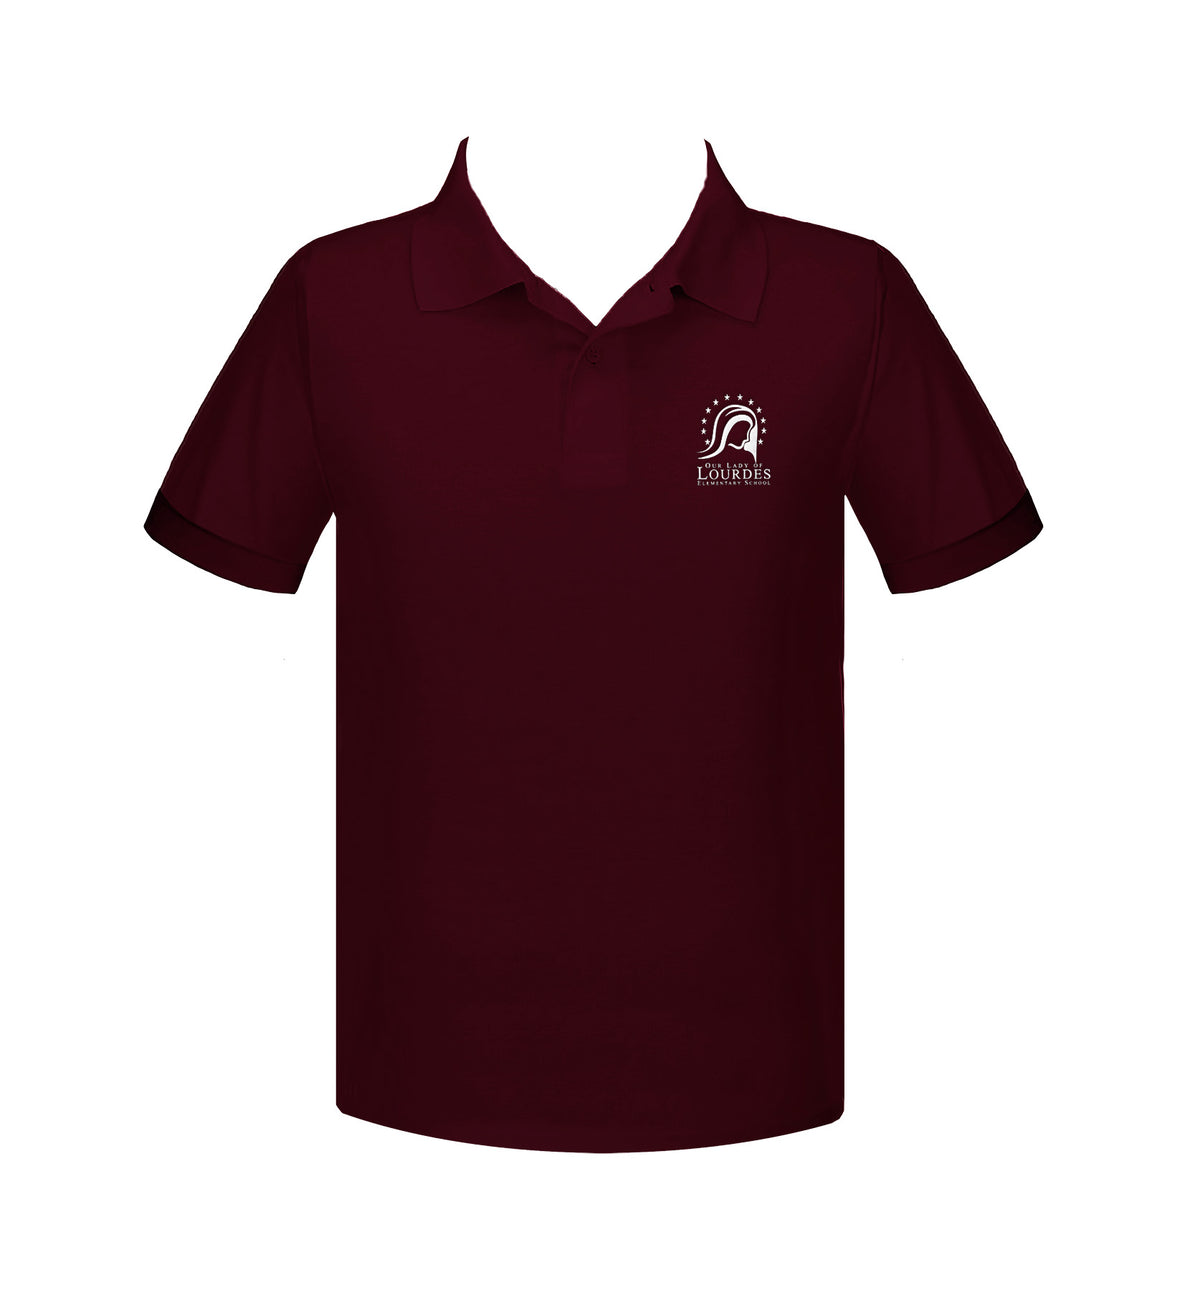 OUR LADY OF LOURDES GOLF SHIRT, SHORT SLEEVE, CHILD